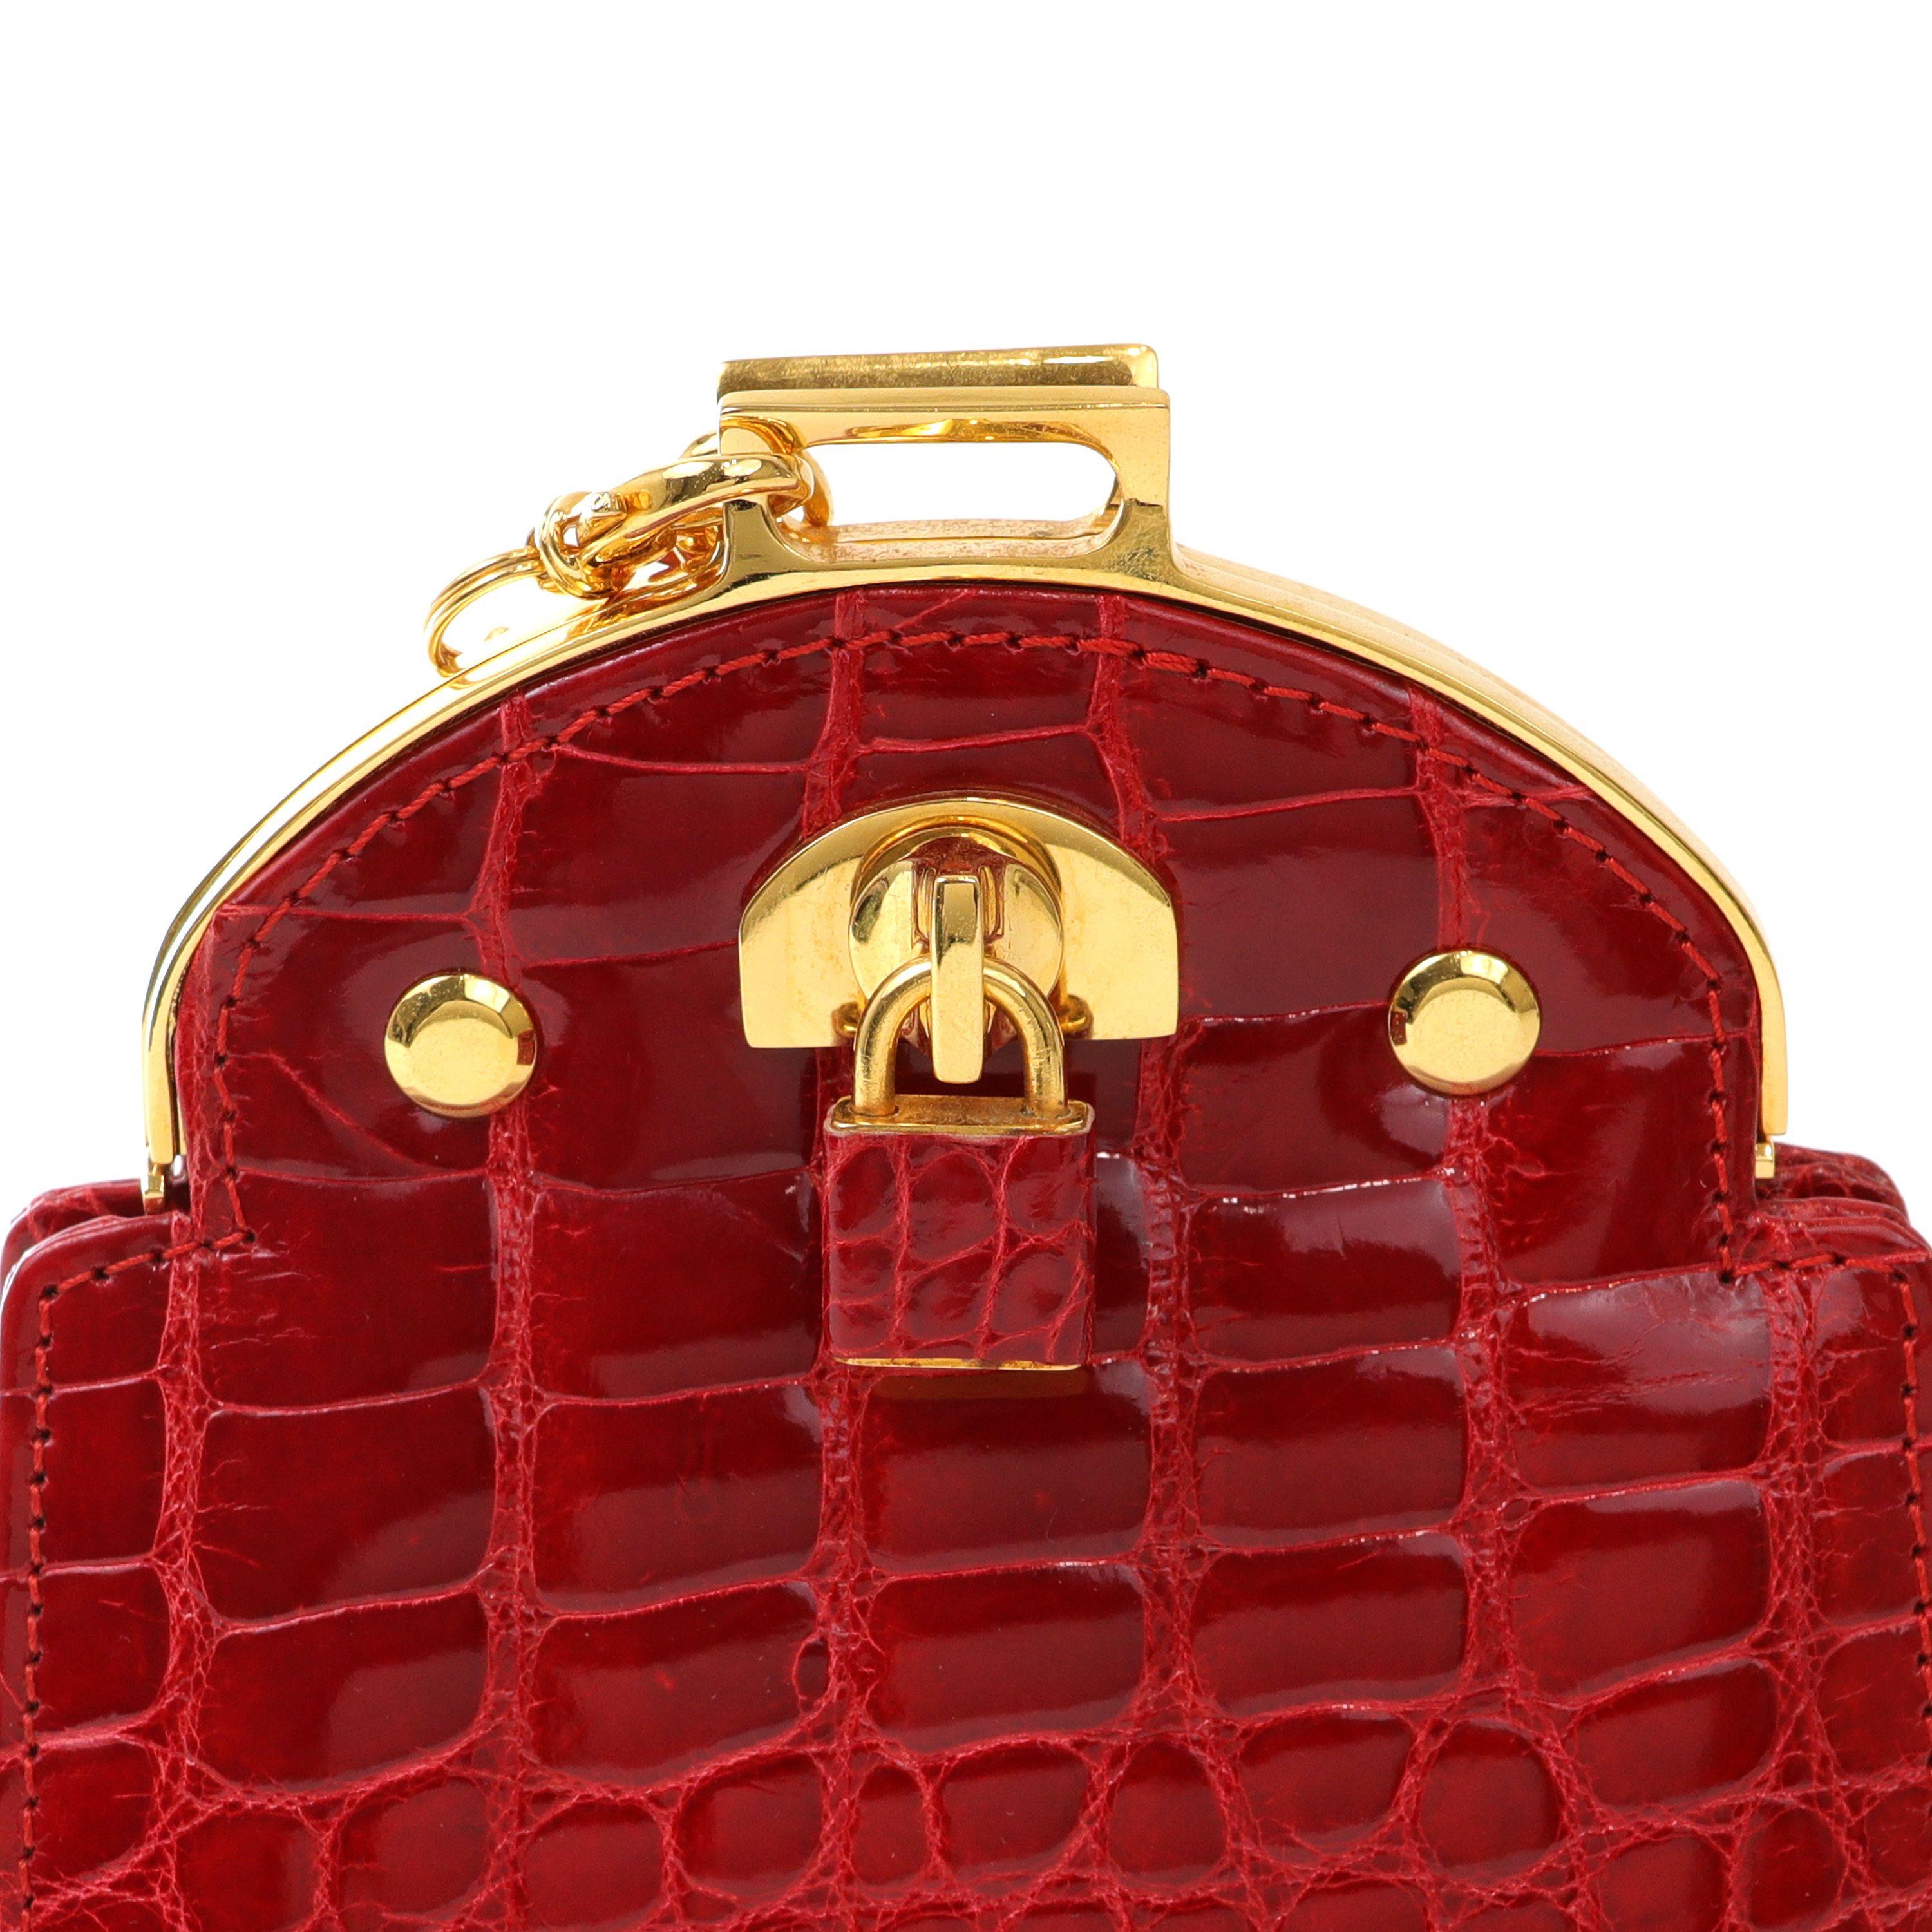 This authentic Giorgio’s Red Crocodile Mini Evening Bag is in beautiful vintage condition.  Striking red crocodile skin with gold hardware accents and padlock detail. Leather and chain entwined long shoulder strap.   Dust bag included.

PBF 14018